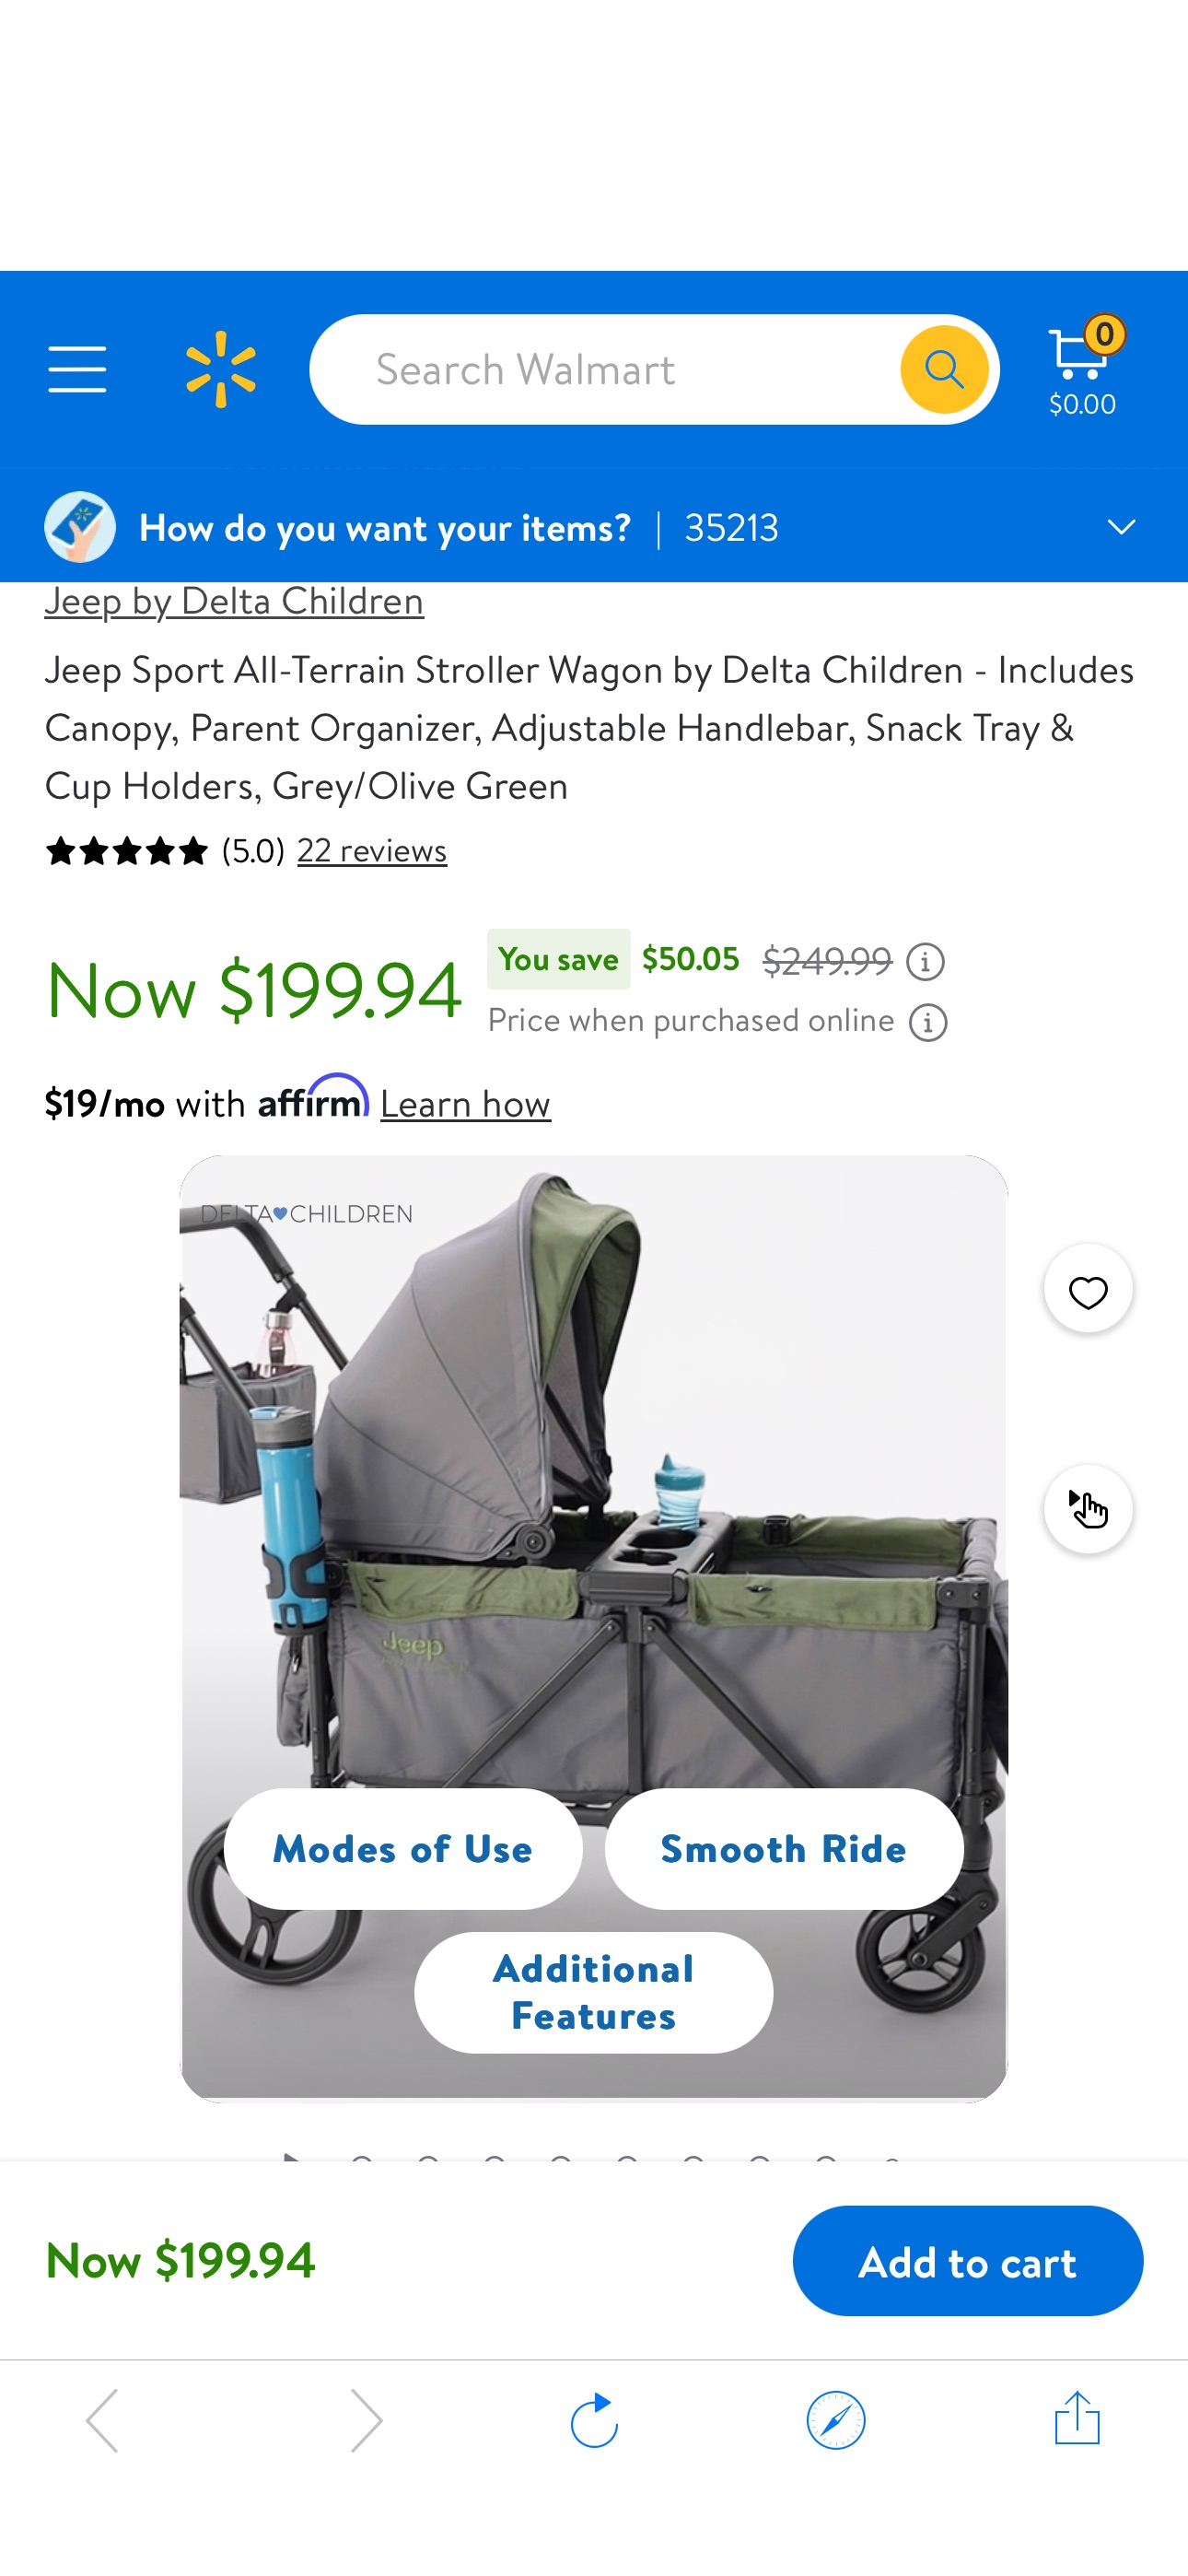 Jeep Sport All-Terrain Stroller Wagon by Delta Children - Includes Canopy, Parent Organizer, Adjustable Handlebar, Snack Tray & Cup Holders, Grey/Olive Green - Walmart.com